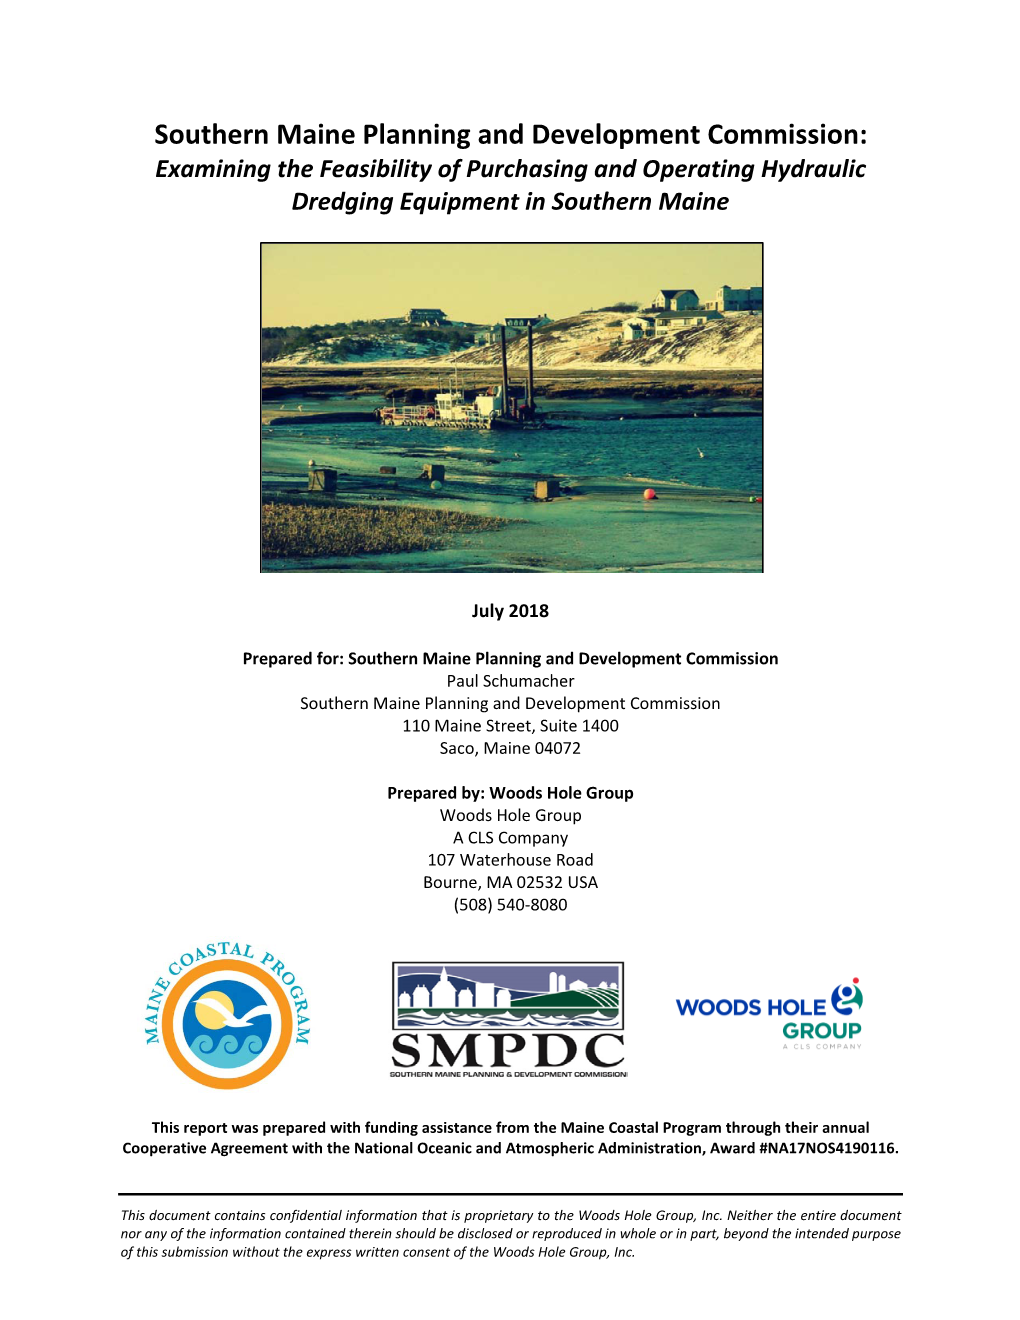 SMPDC Dredge Purchase Feasibility Final Report